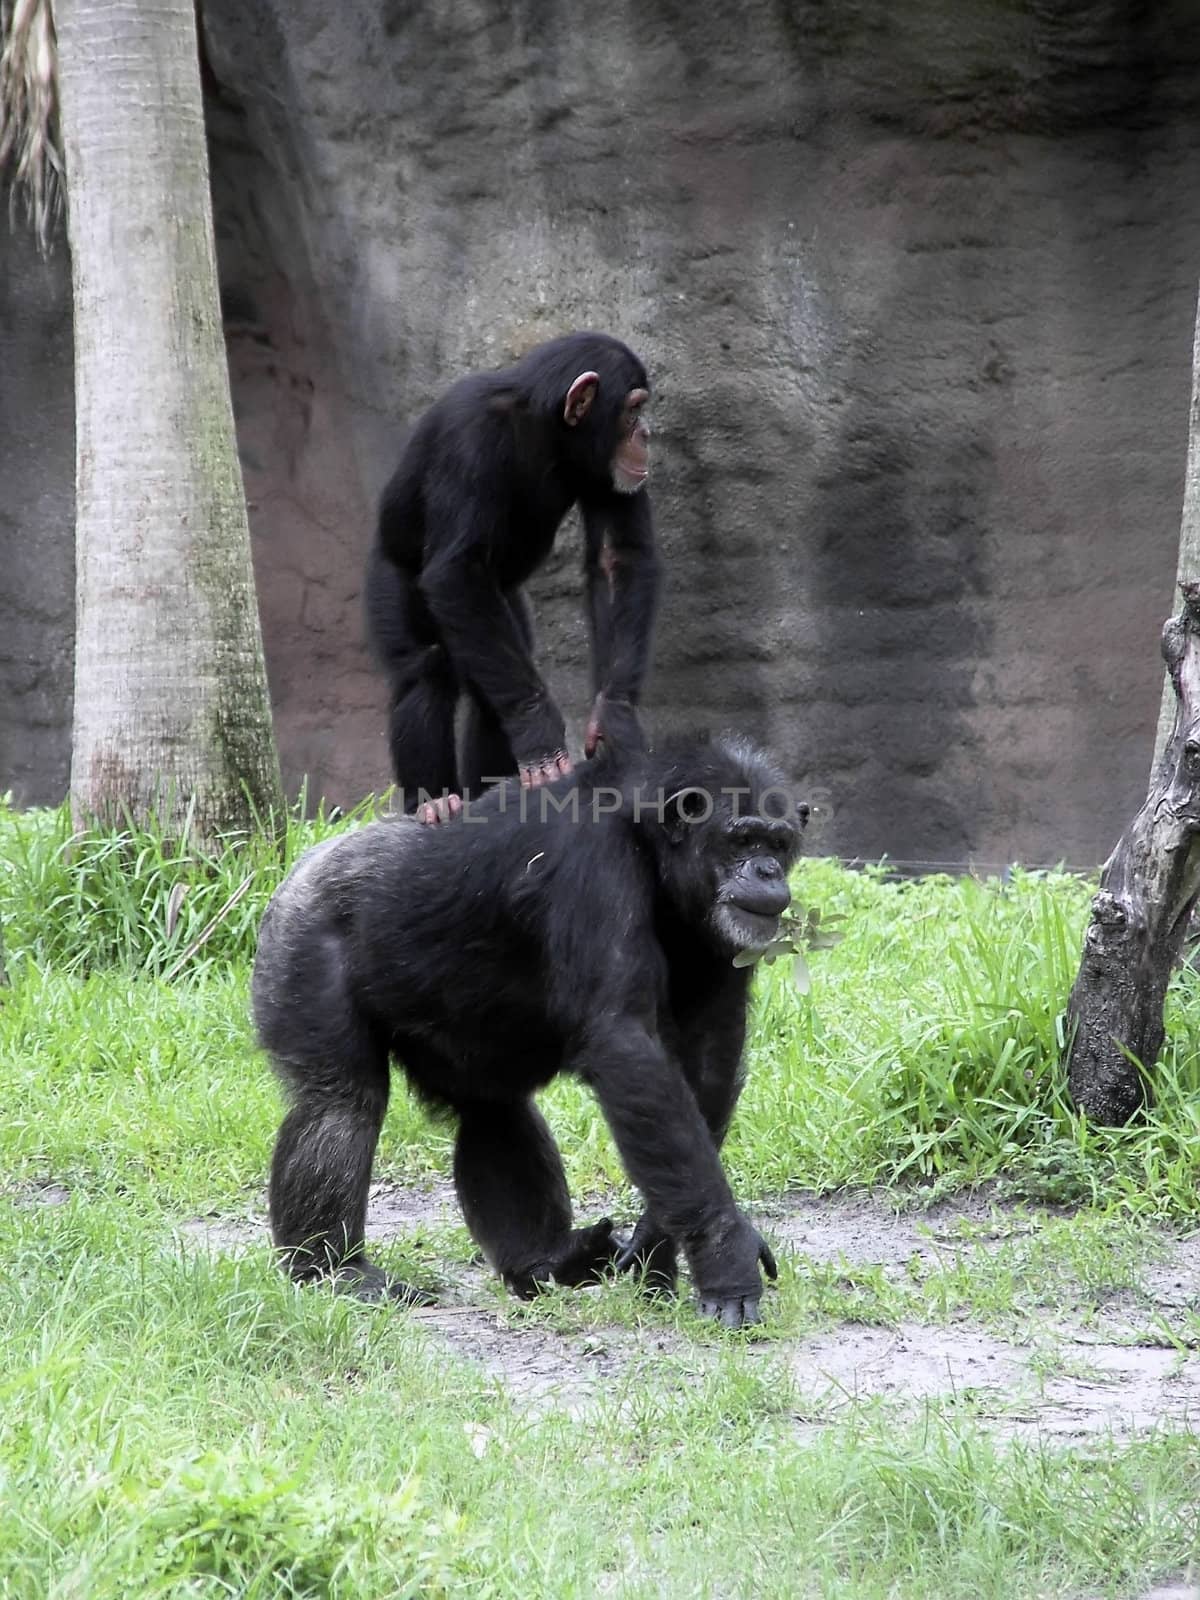 Mother & Child chimpanzees in natural wildlife park, playing games